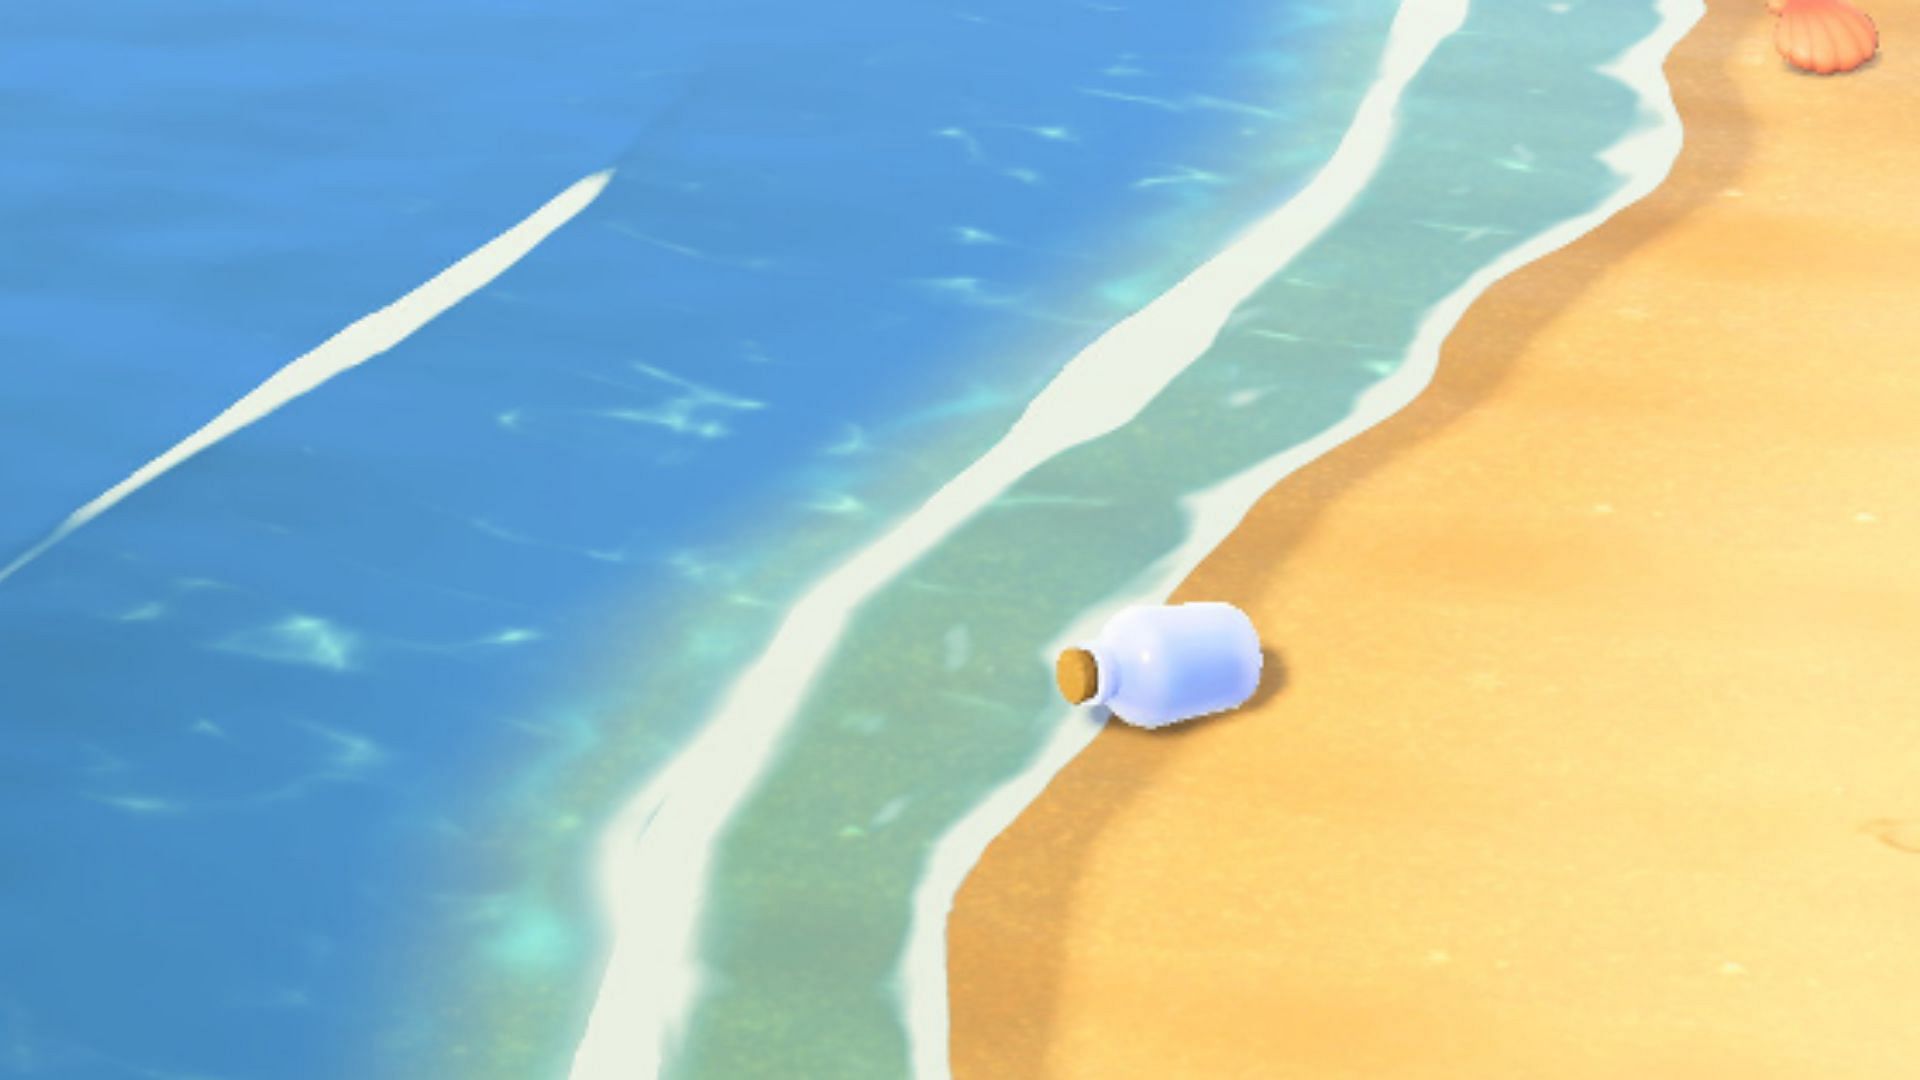 Animal Crossing: New Horizons player creates an impressive message in a bottle in real life (Image via Nintendo)